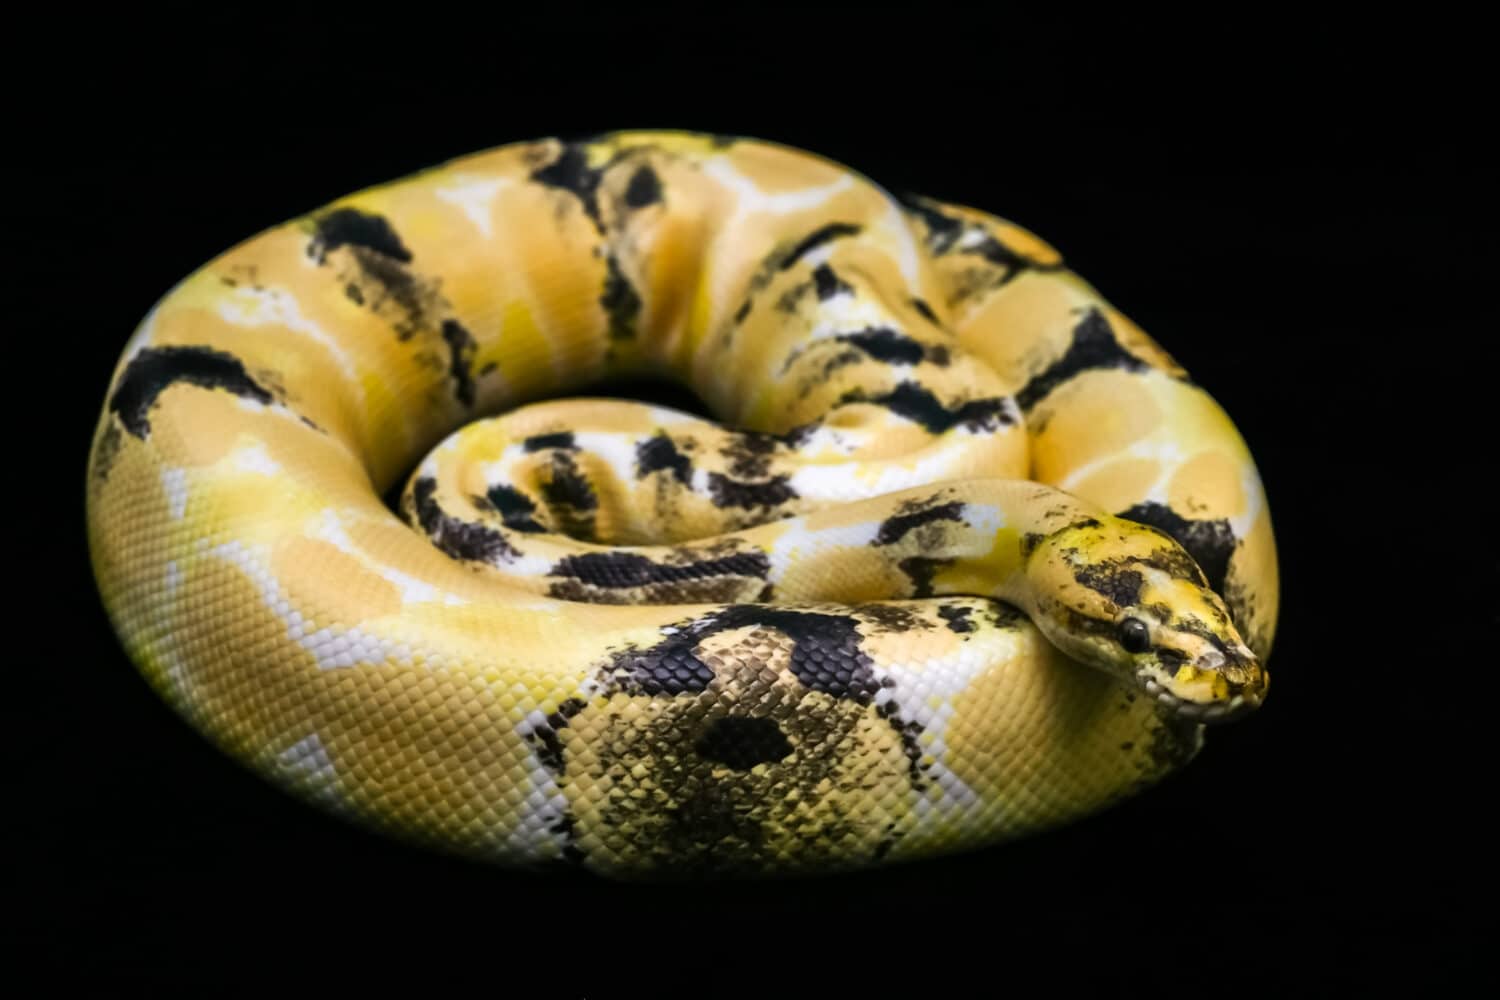 Paradox calico morph Ball python (python regius) on black floor background. Image of beautiful snake for exotic pets or reptile keeper. Amazing pattern on snake skin.